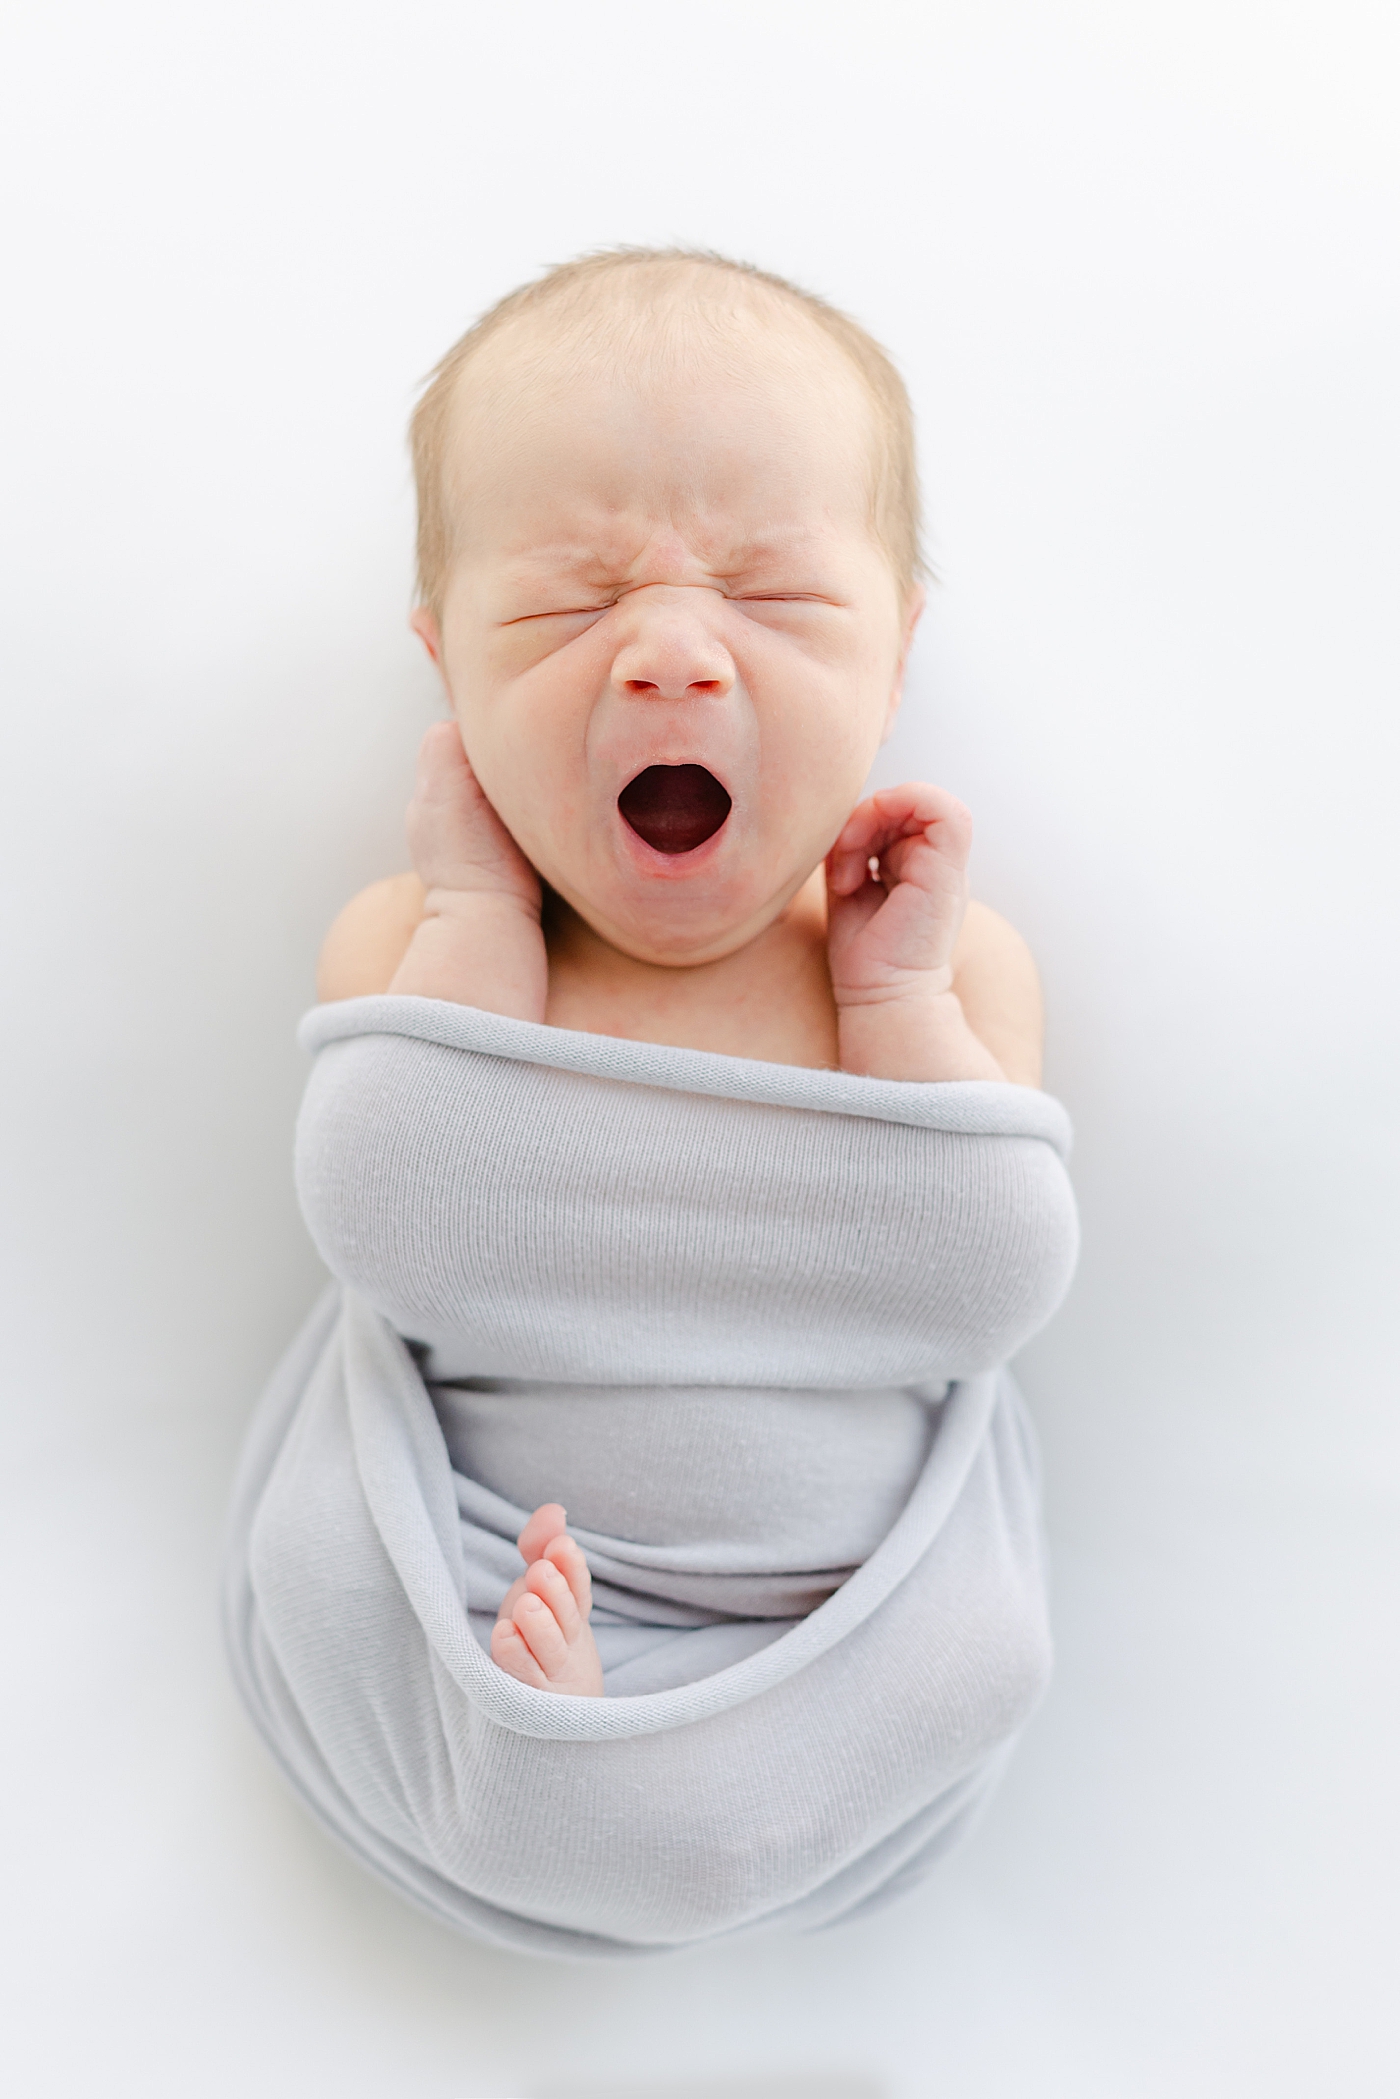 Newborn baby boy in a gray swaddle yawning | Image by Sana Ahmed Photography 